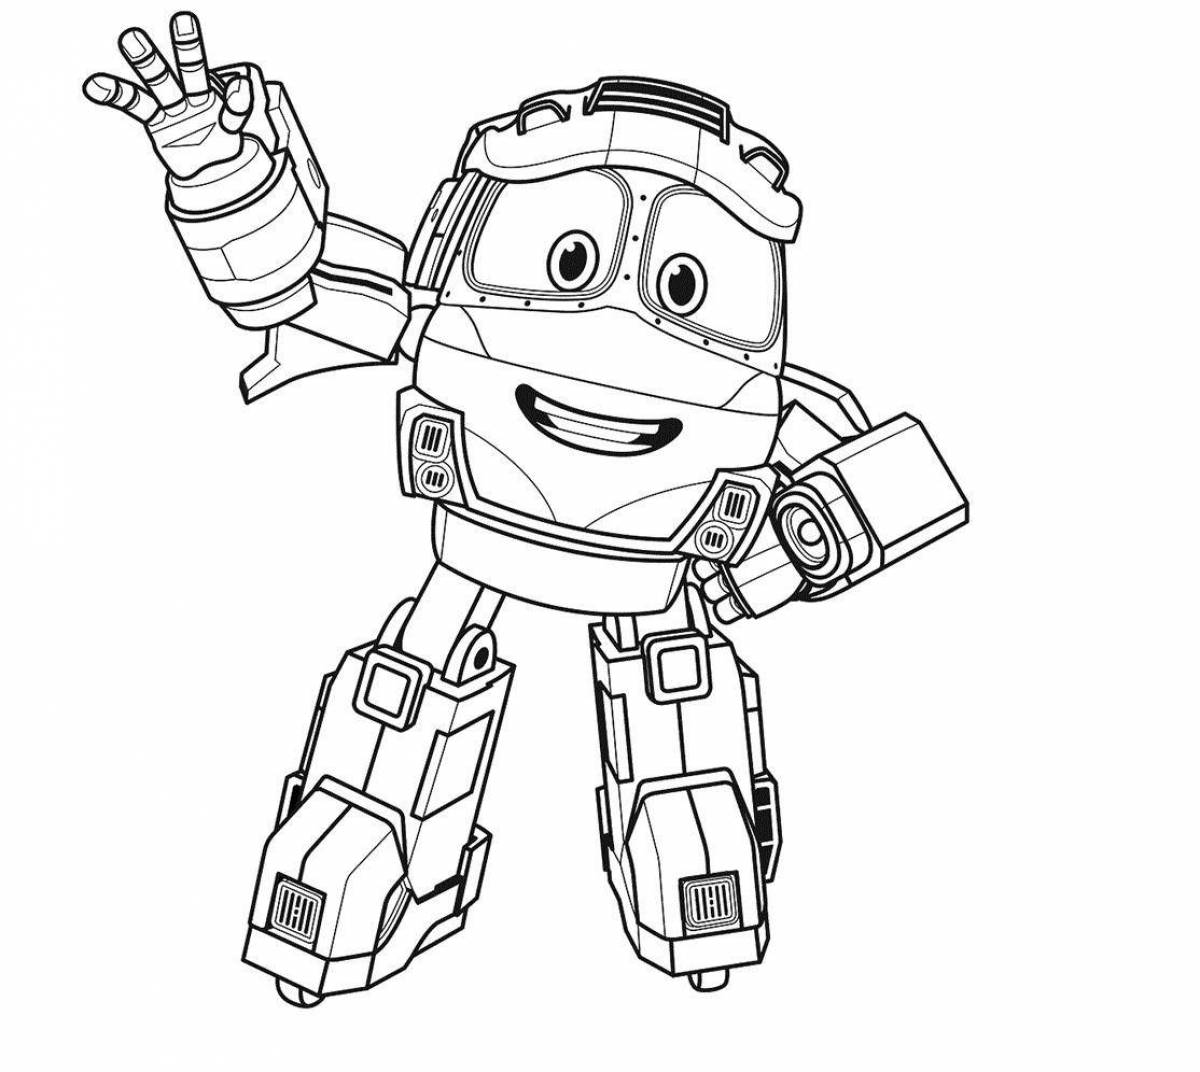 Playful tobot boys coloring page